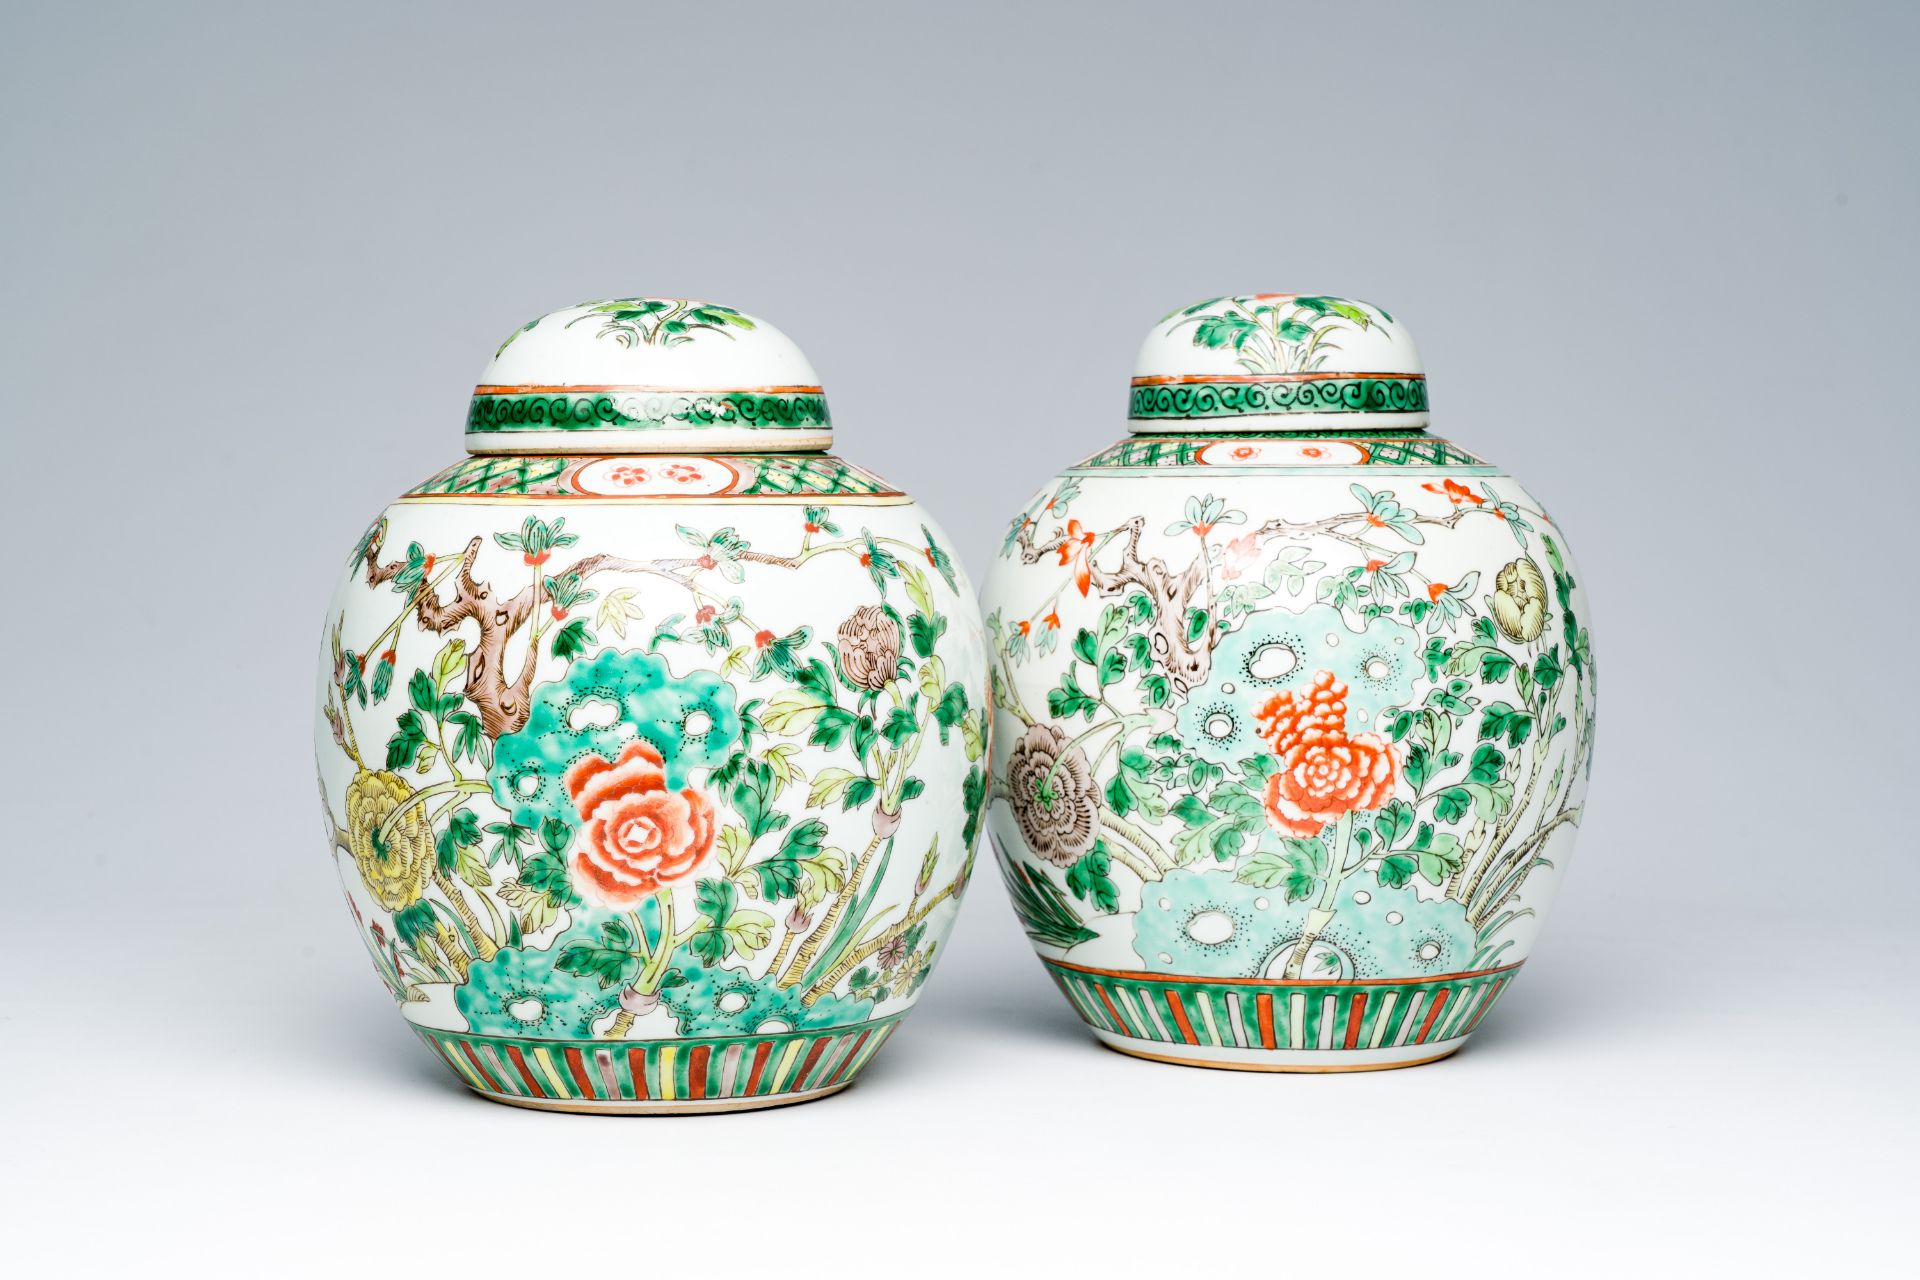 Two Chinese famille verte jars and covers with floral design, 19th C.